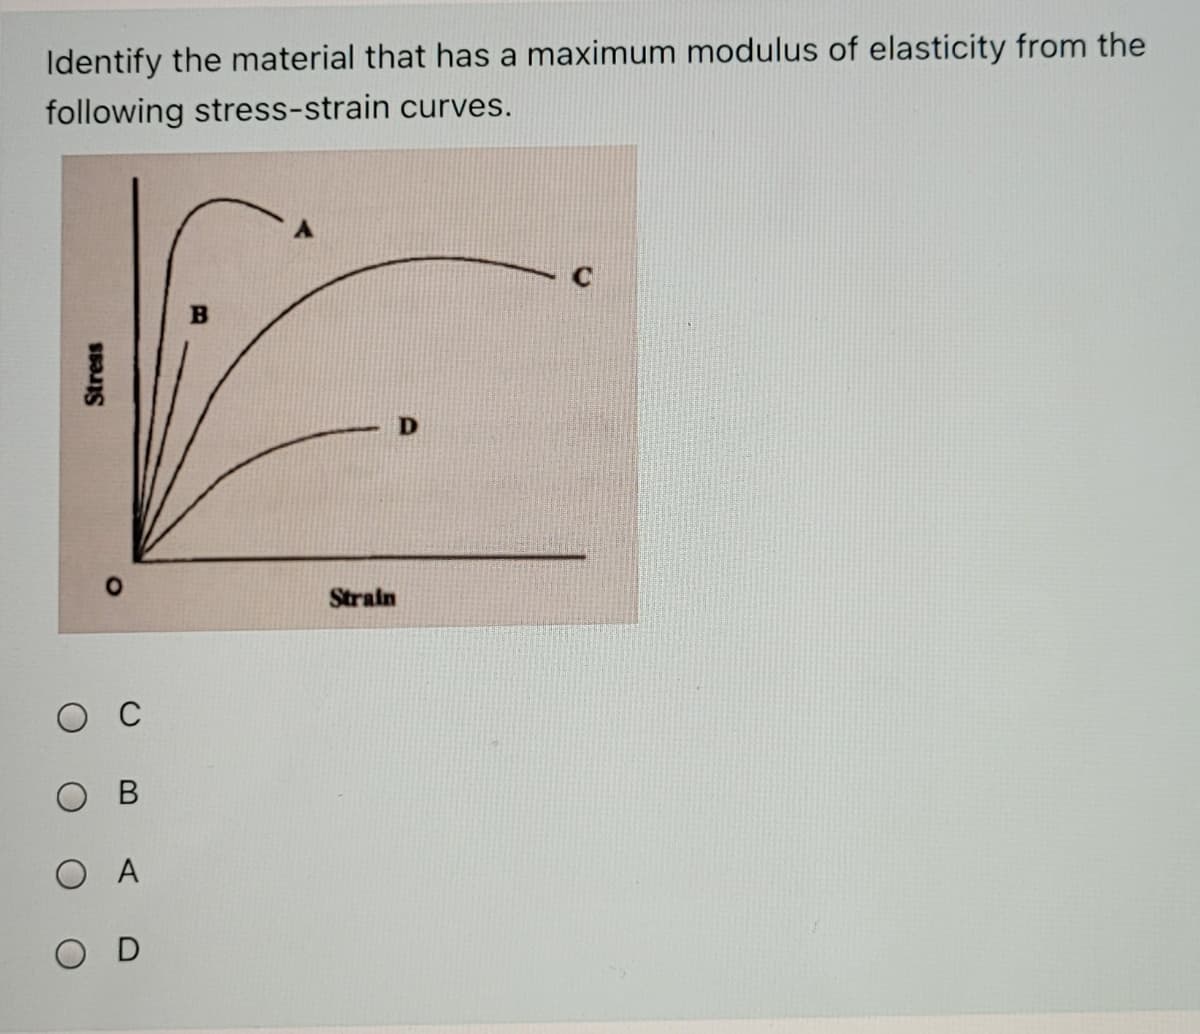 Identify the material that has a maximum modulus of elasticity from the
following stress-strain curves.
Strain
В
O A
O D
